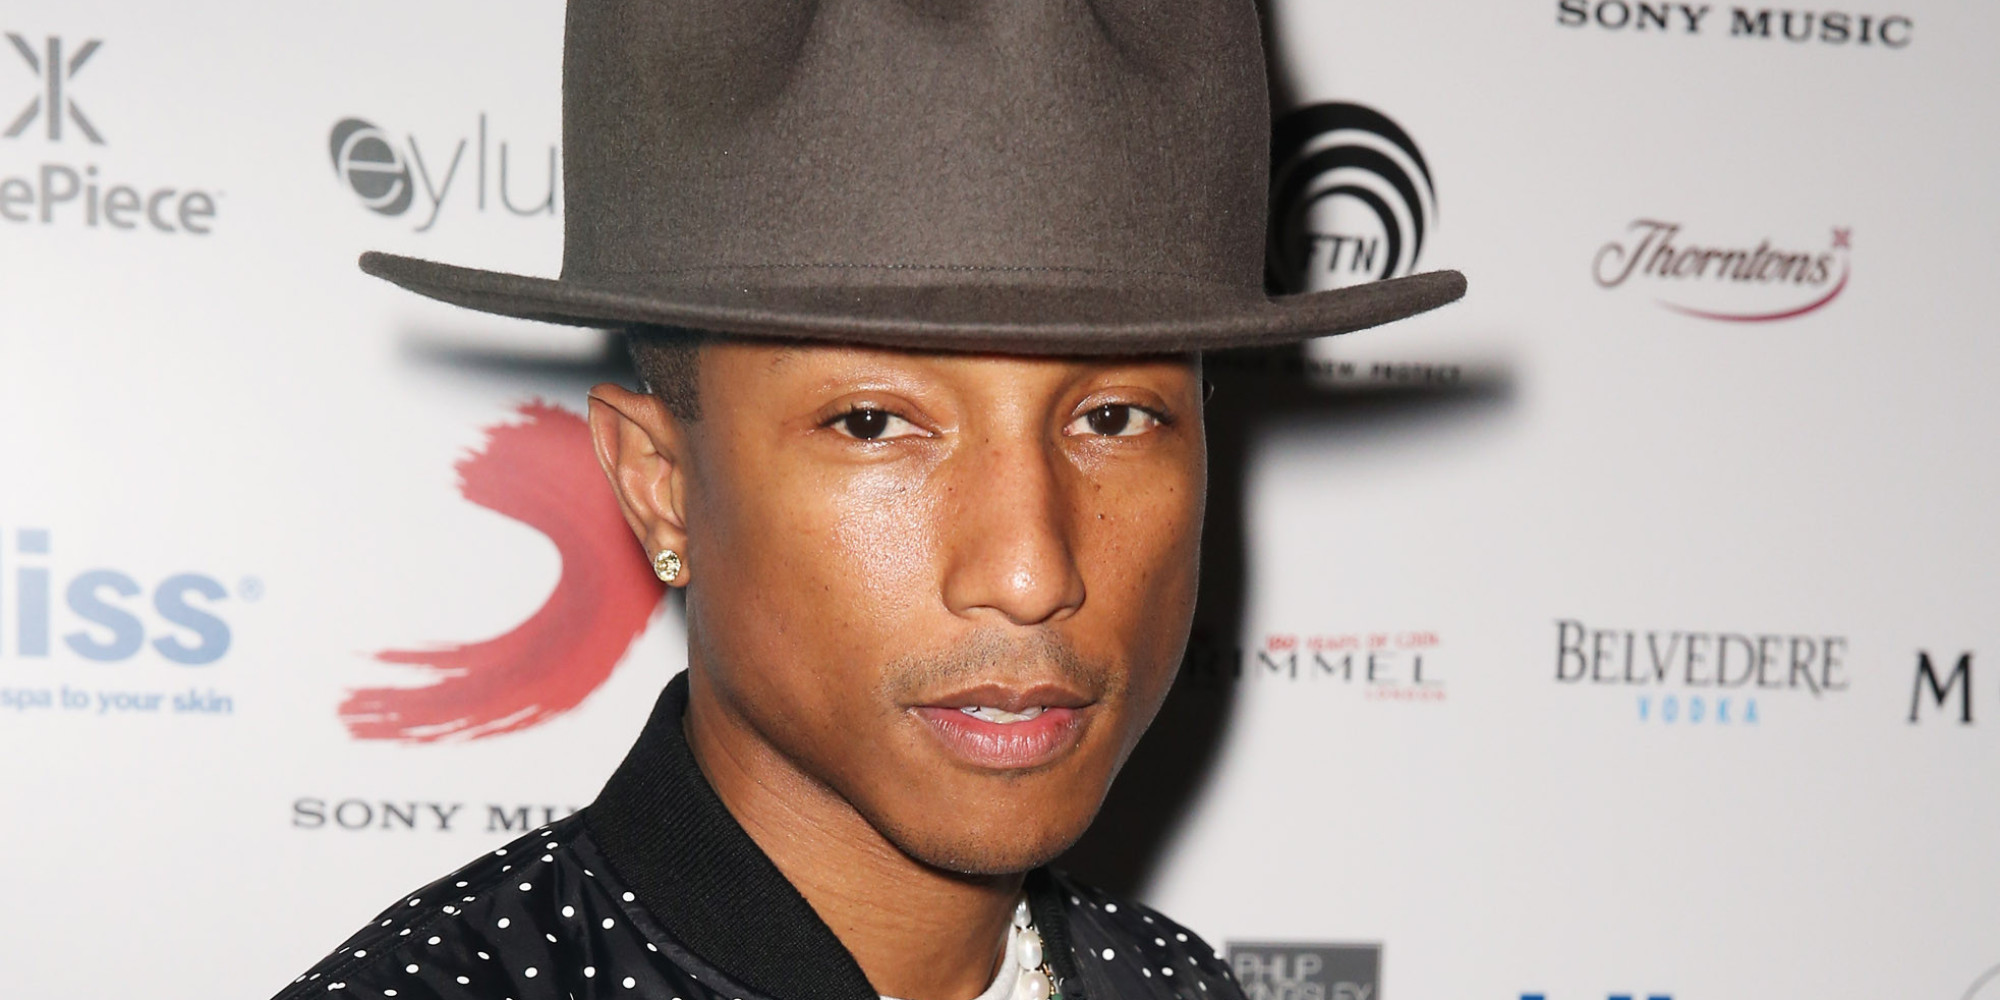 Why is Pharrell Williams so rich?